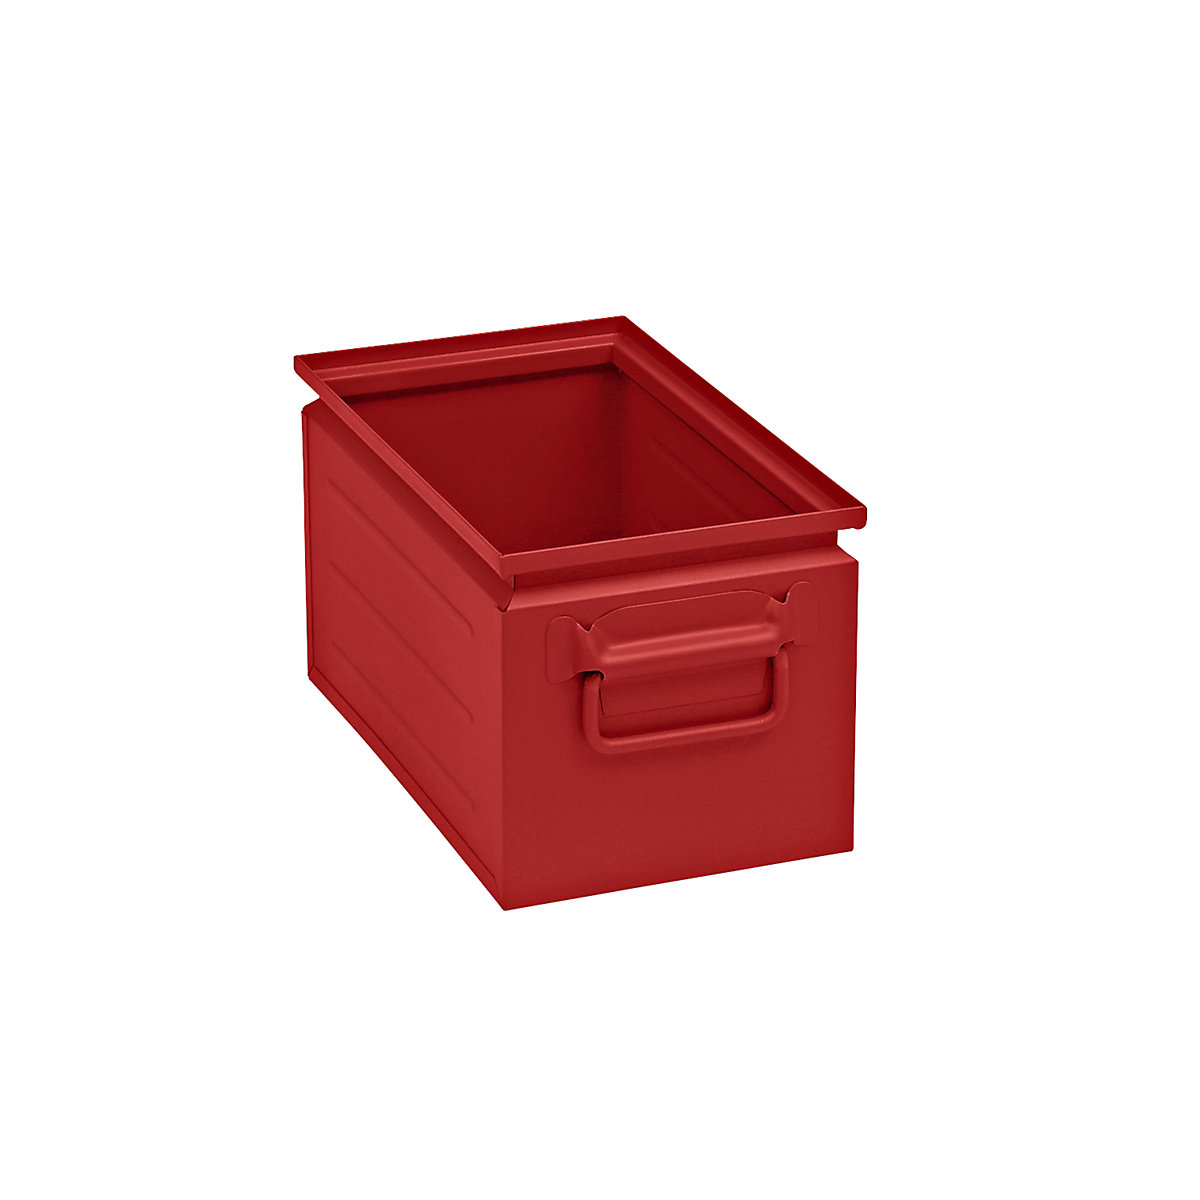 Stacking container made of sheet steel, capacity approx. 14 l, flame red RAL 3000